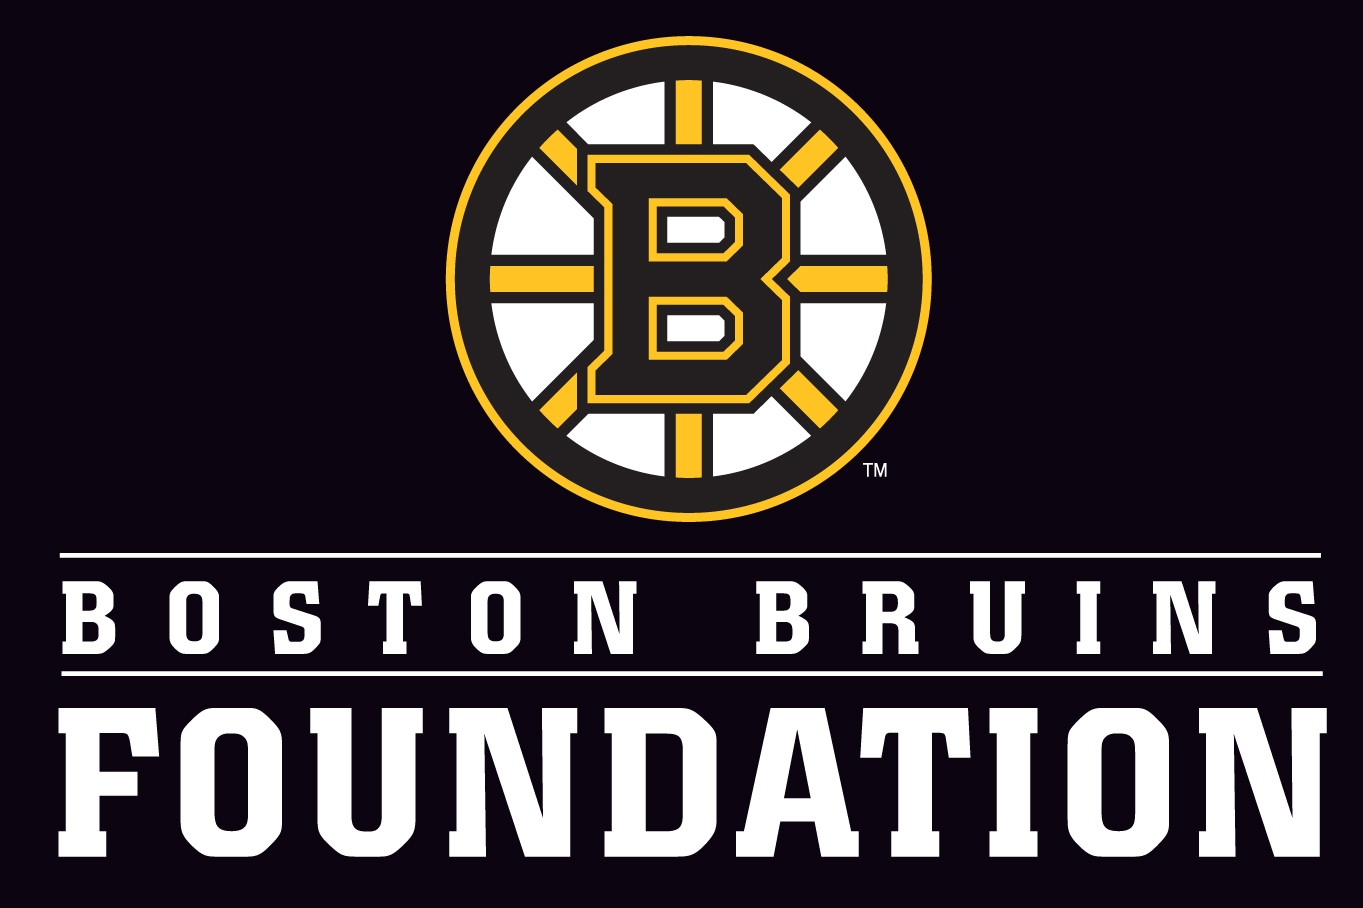 265 things to do in Boston bruins foundation